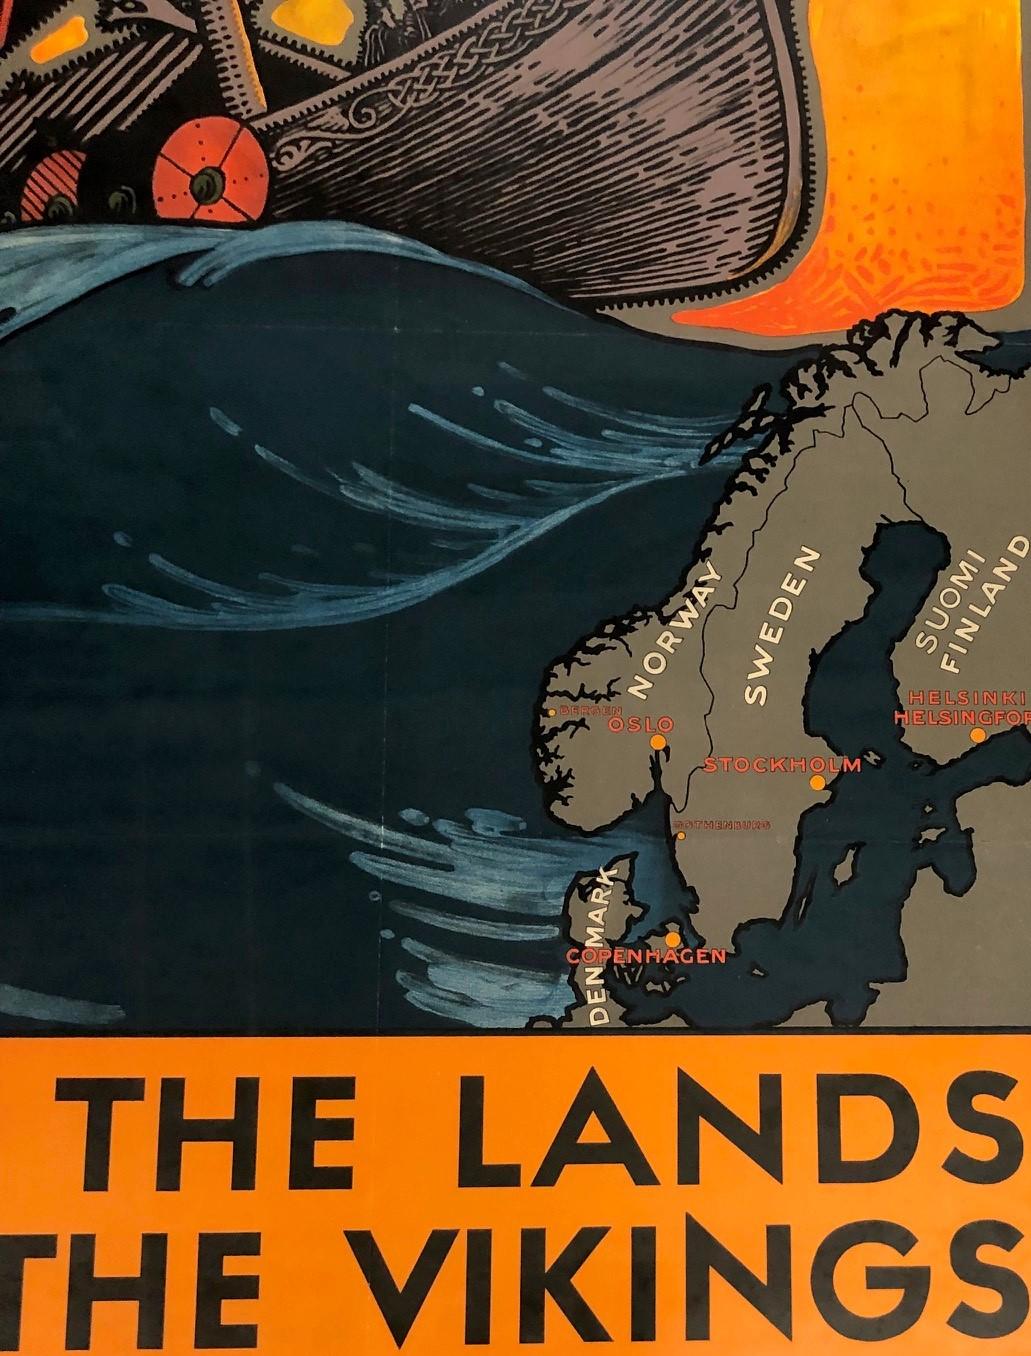 20th Century Vintage Travel Poster 'See the Land of the Vikings' by Ben Blessum, 1937